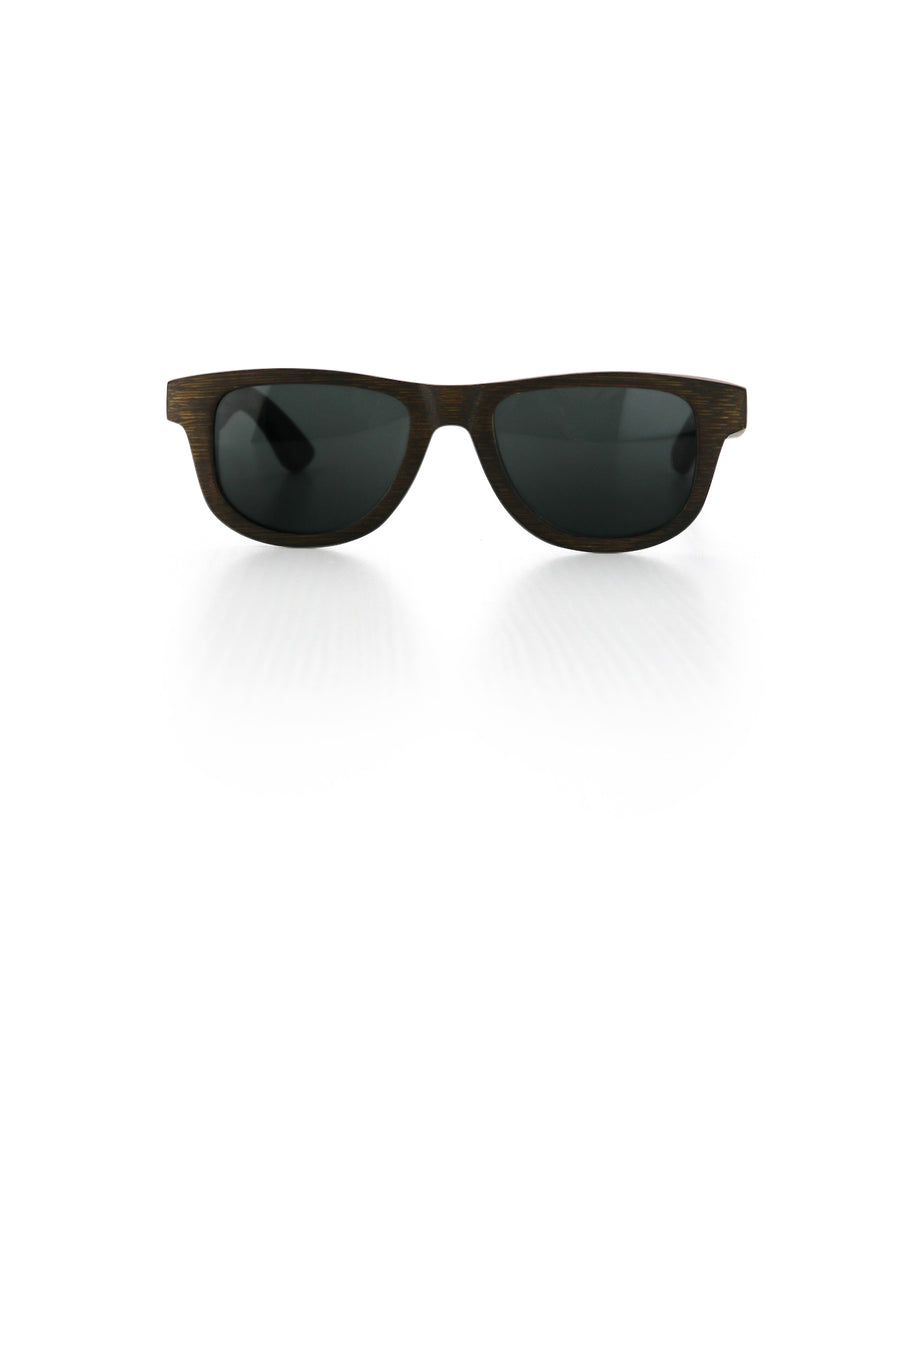 Brown Bamboo Sunglasses - Bailey Ted and Lemon side